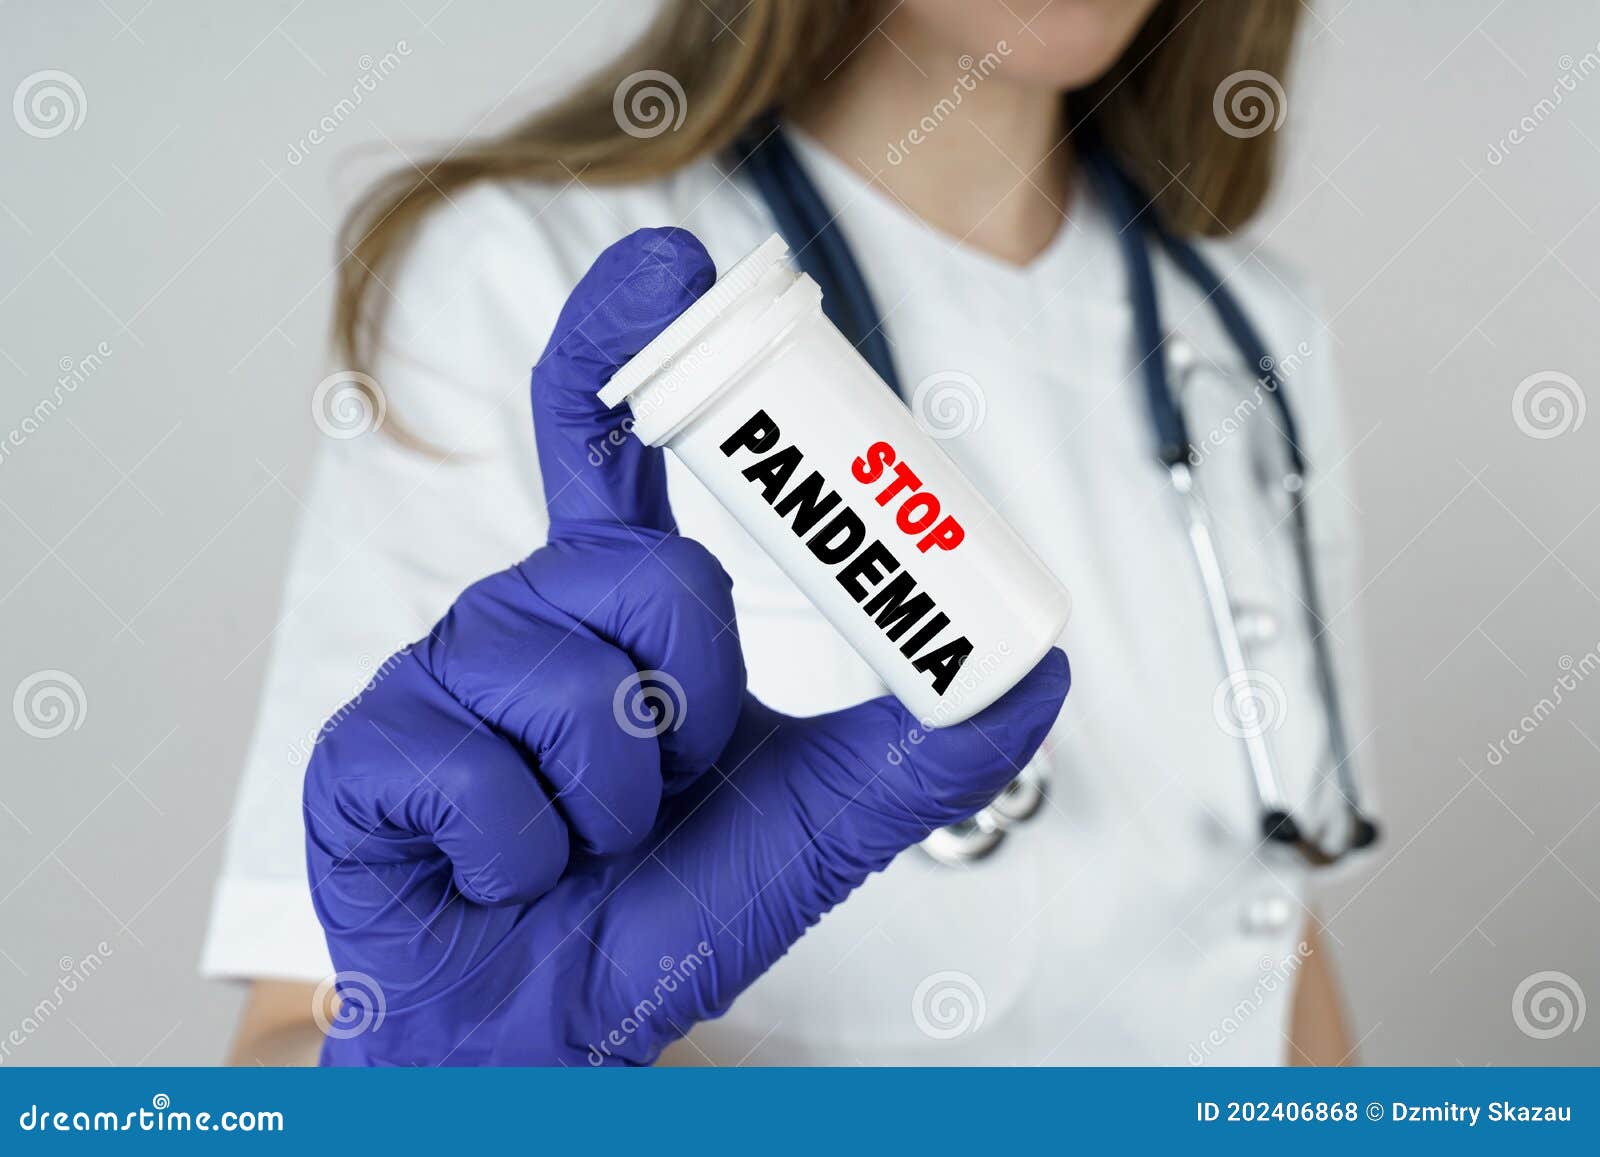 the doctor holds a medicine in his hands, which says - stop pandemia